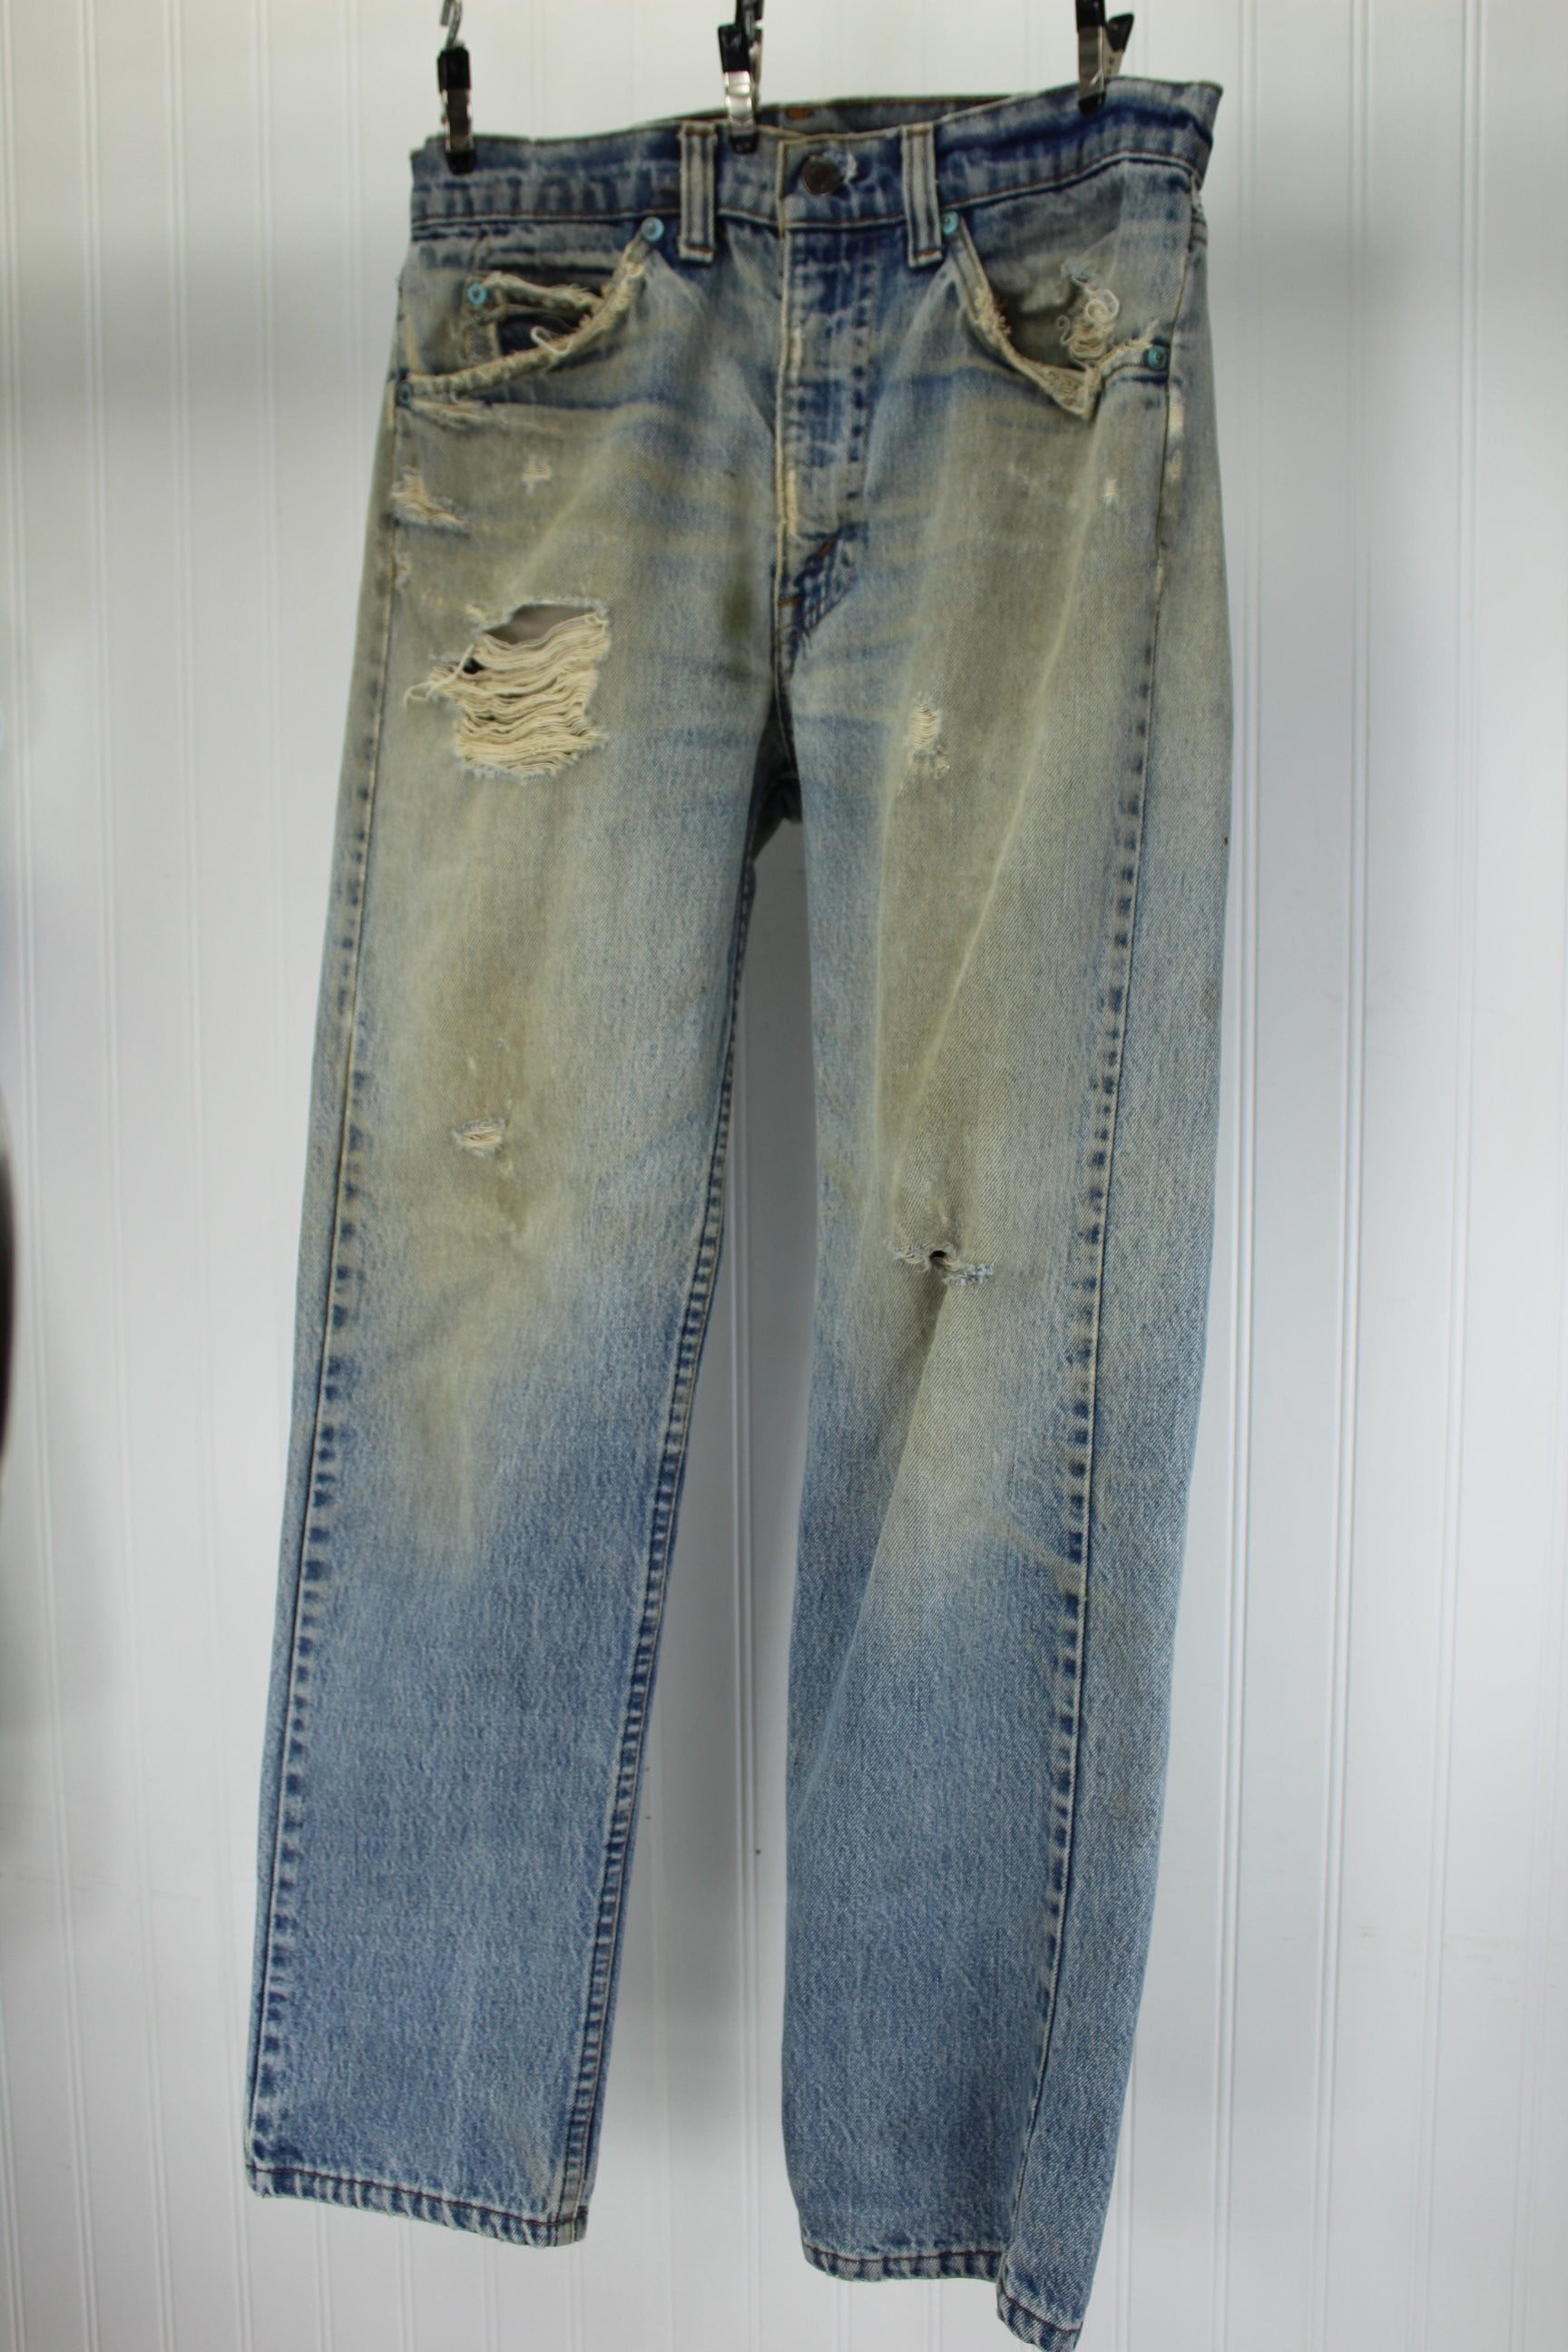 Vintage Levi's Skater Boarder Heavy Distress Grunge Jeans - Early 1990s - Orange Tab heavily distressed